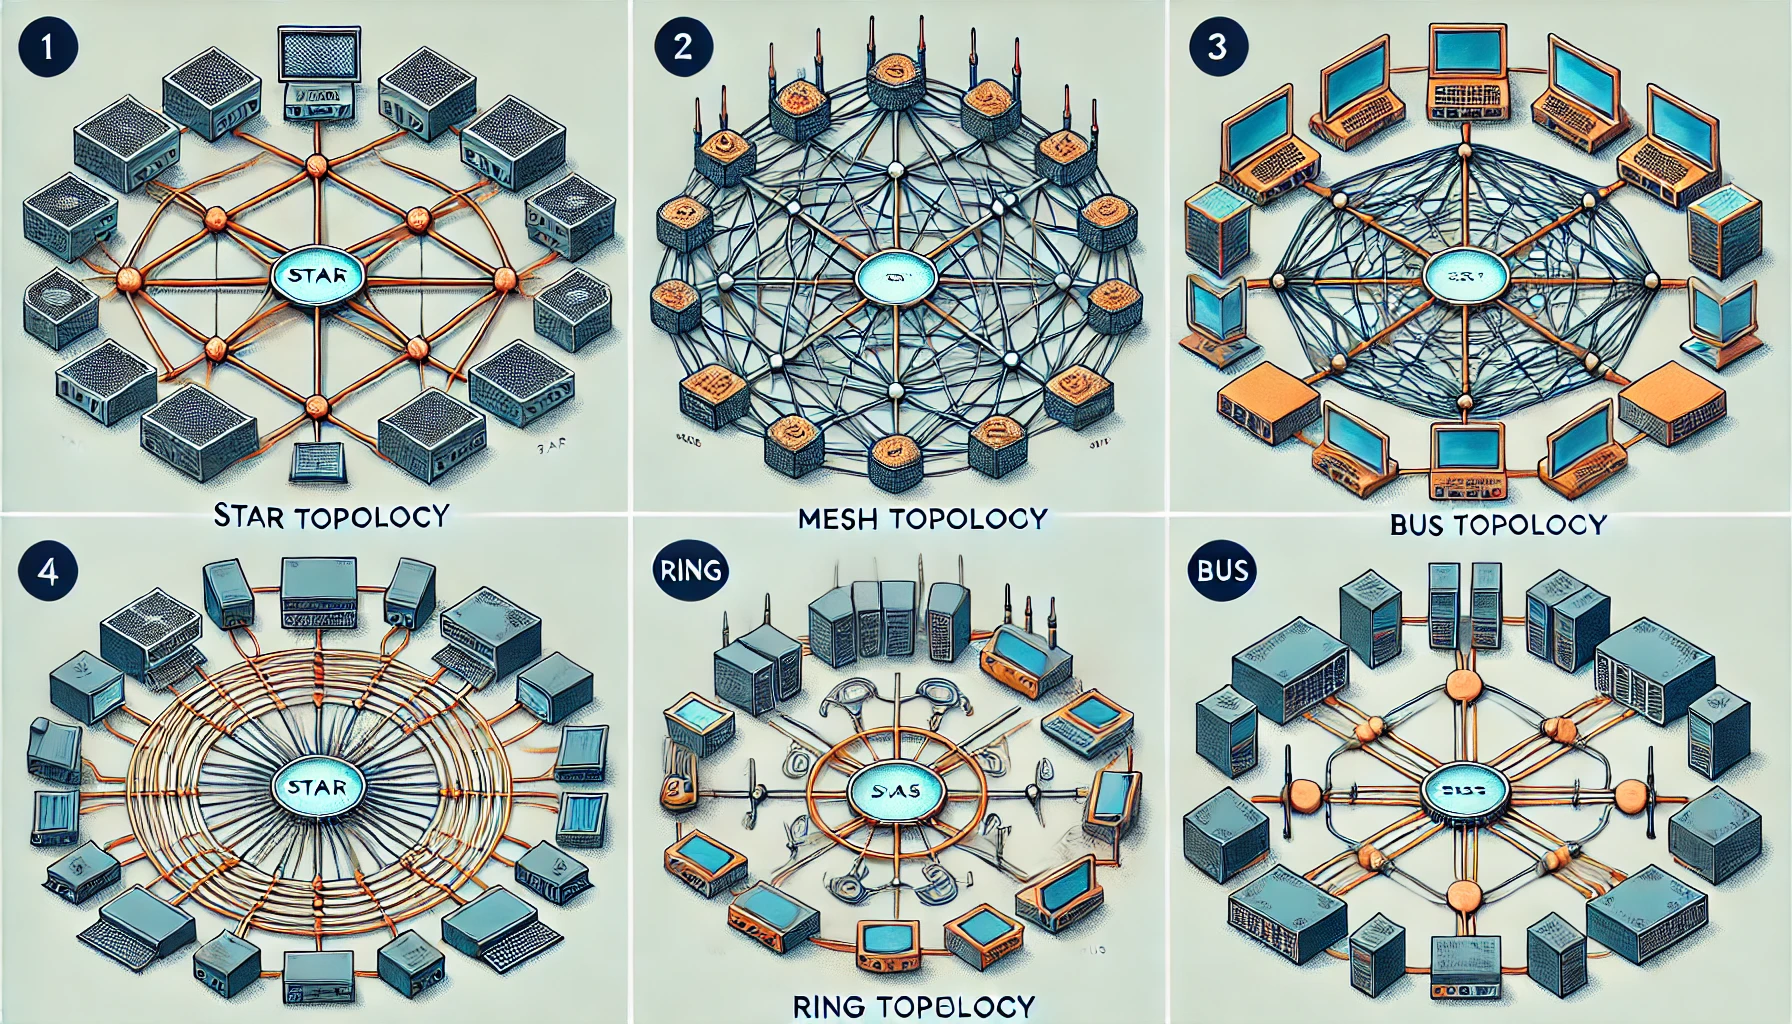 Network topology define how devices in a network are connected and communicate. Here's a deep dive into four common topologies: Star, Mesh, Ring, and Bus.